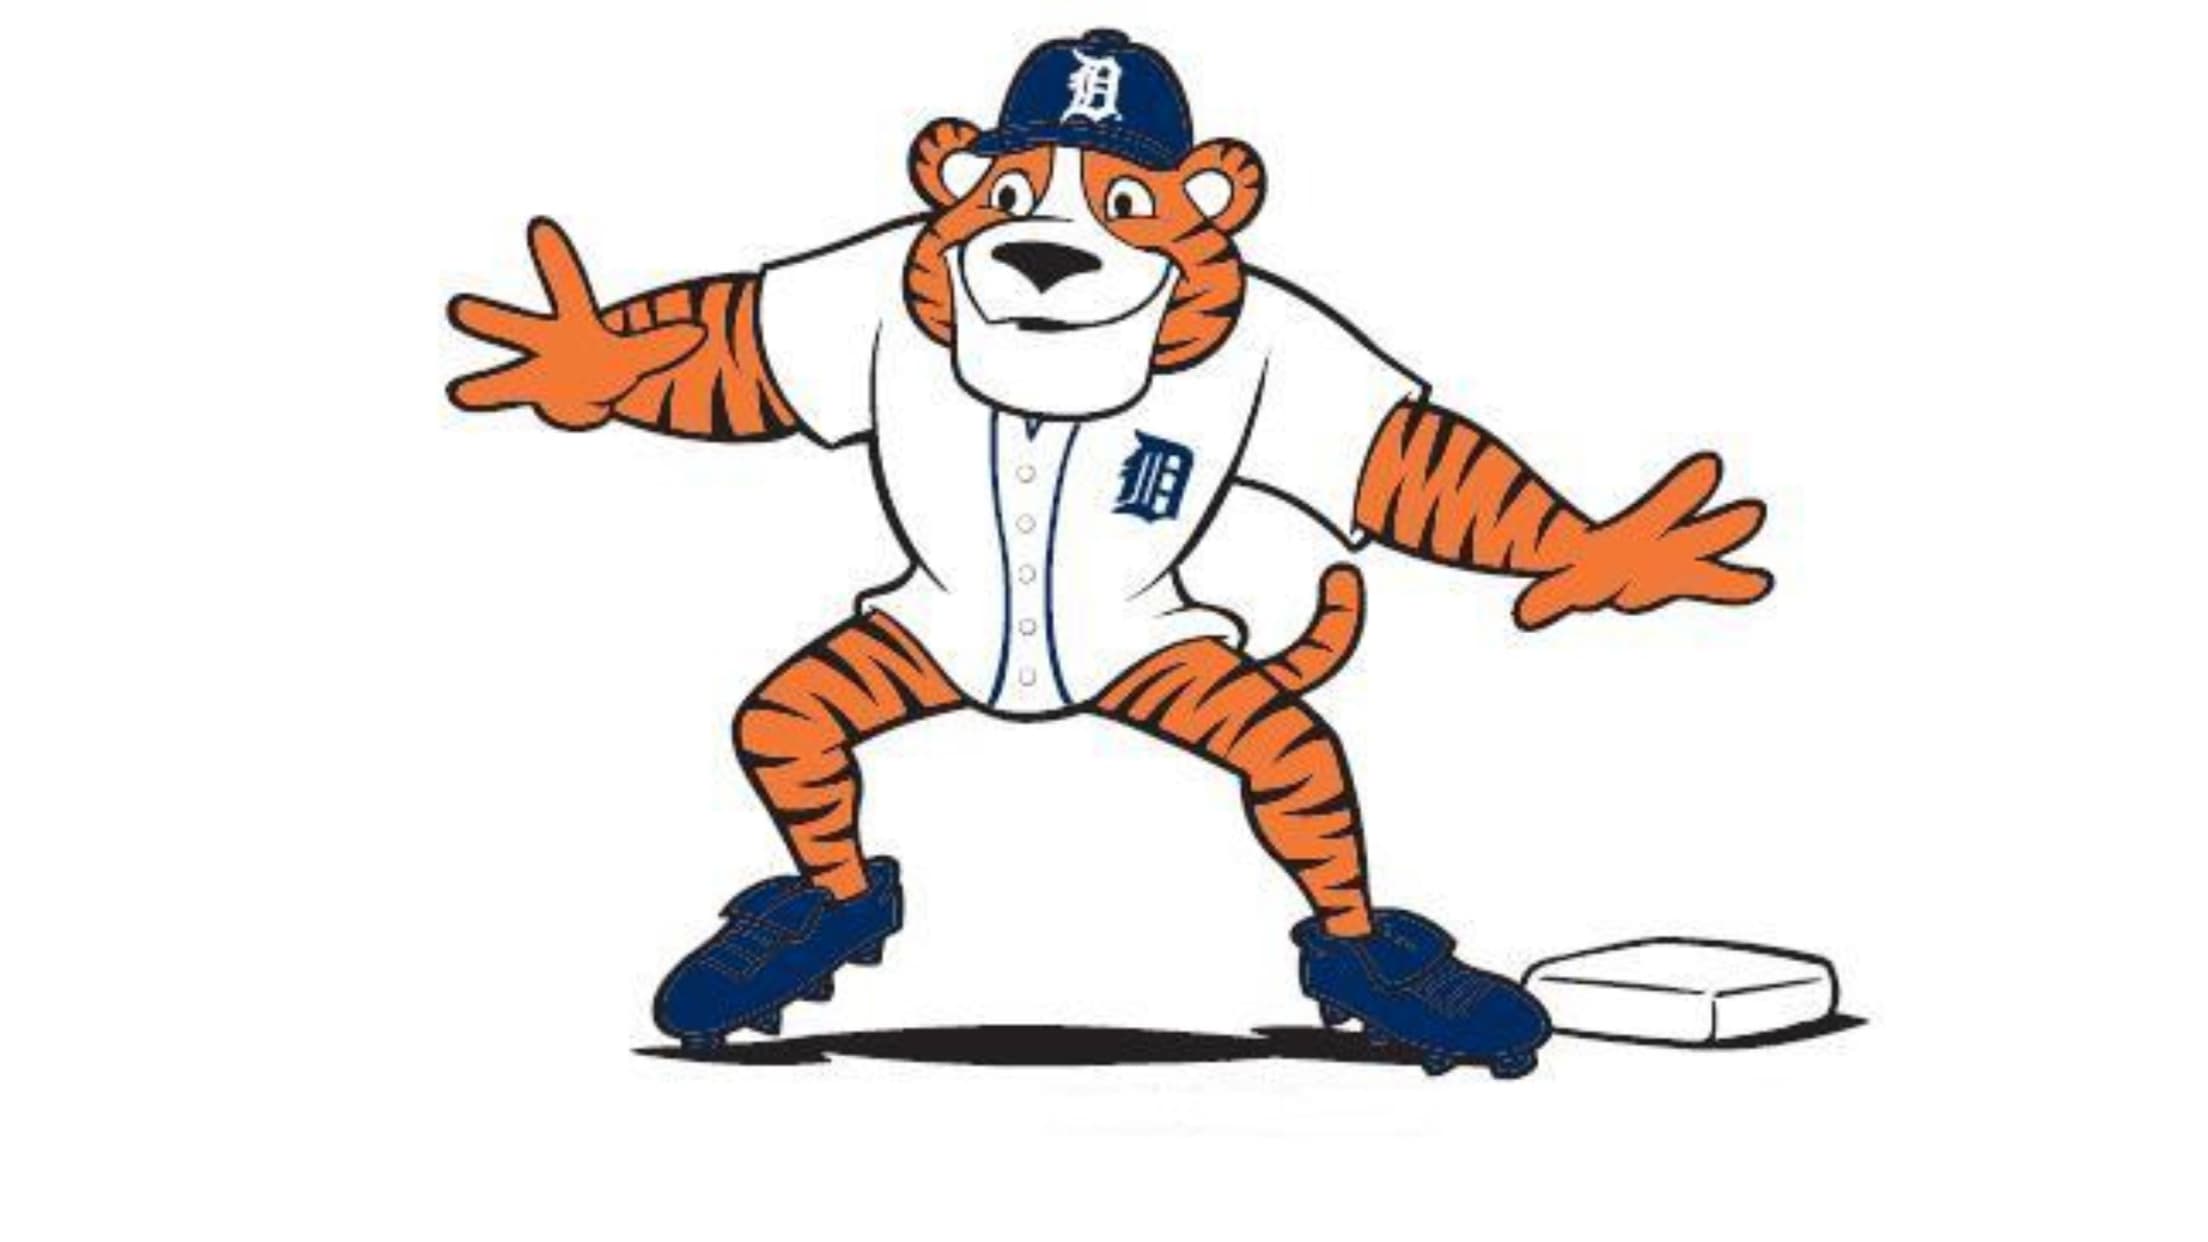 Assistant Has Fun with PAWS at the Detroit Tigers Baseball Game